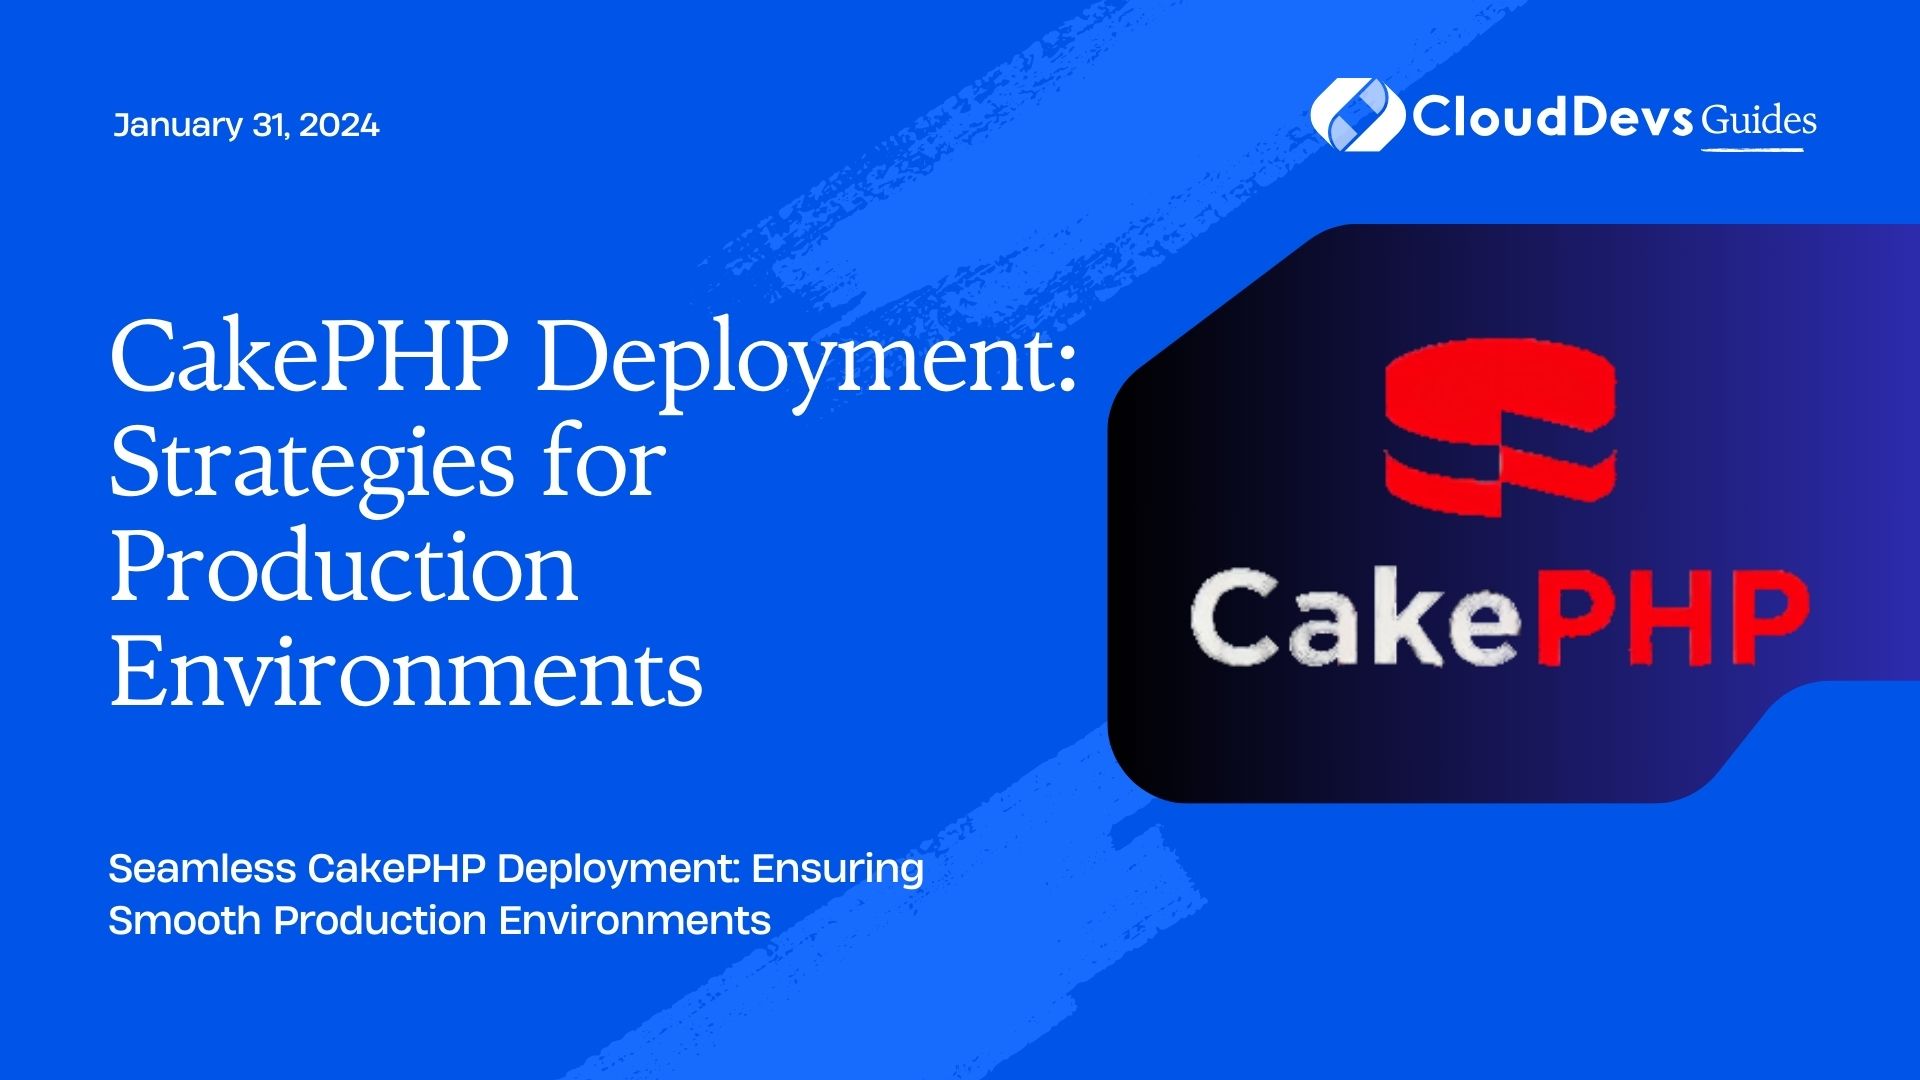 CakePHP Deployment: Strategies for Production Environments